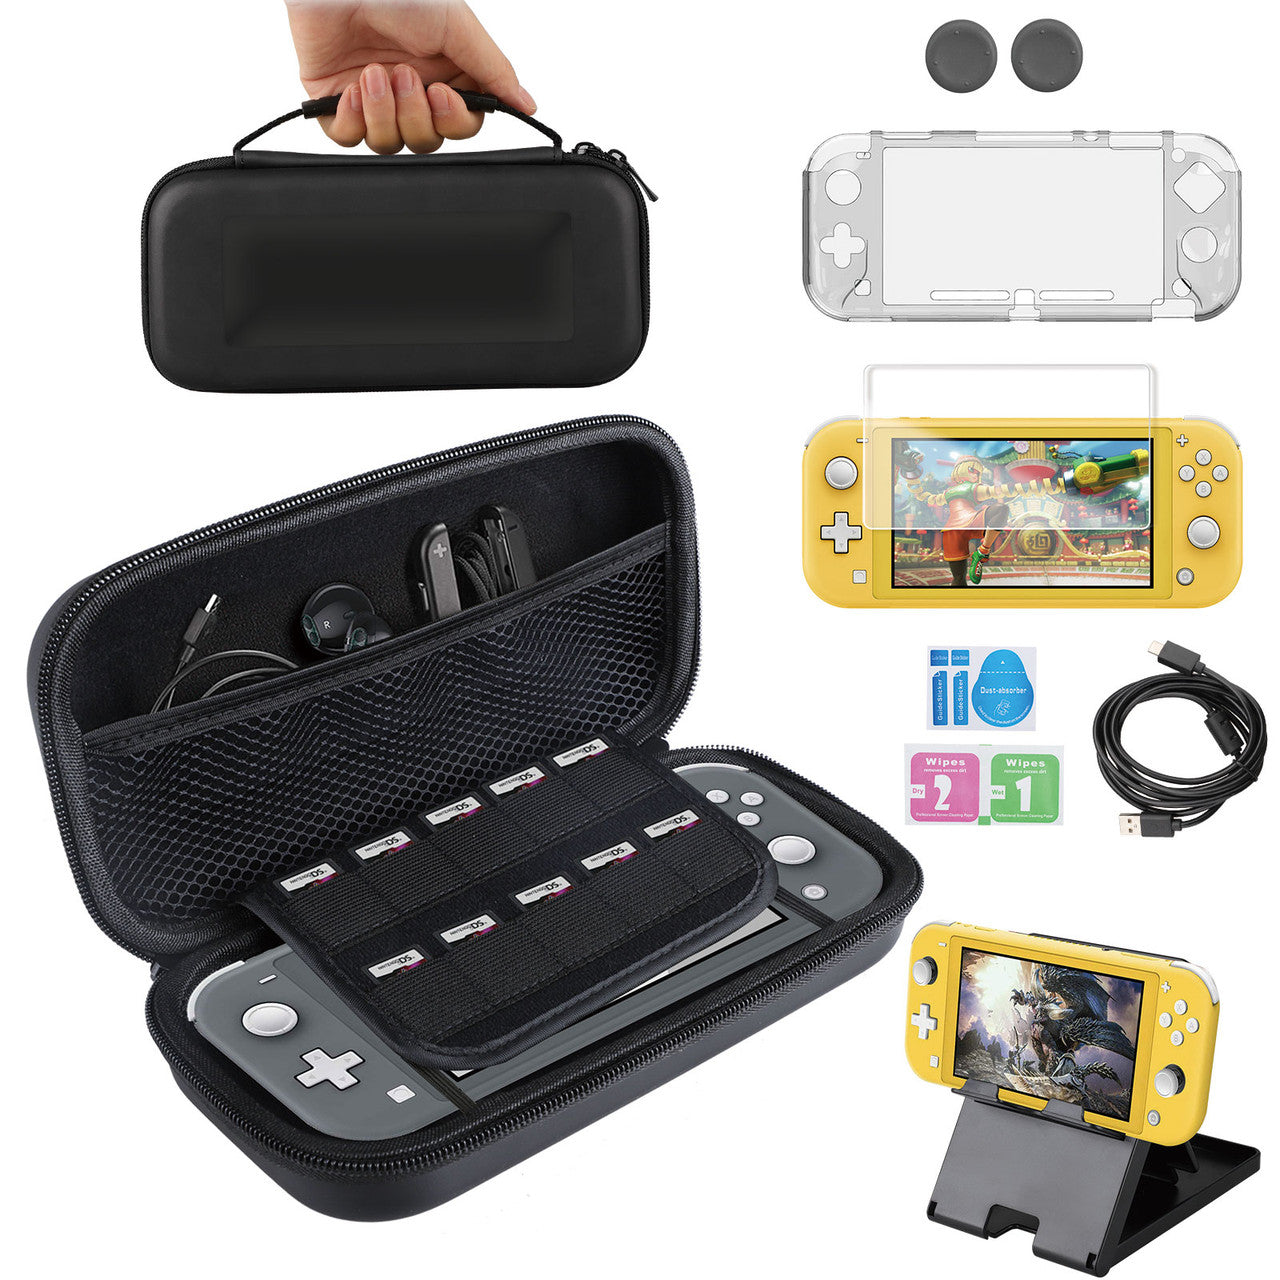 Complete Starter Kit for Nintendo Switch Lite, 7in 1 NS Lite 2019 Accessories Bundle W/ Screen Protector, Travel Case, Foldable Stand, Clear Case, Thumb Stick Cap, Type-c Charging Cable